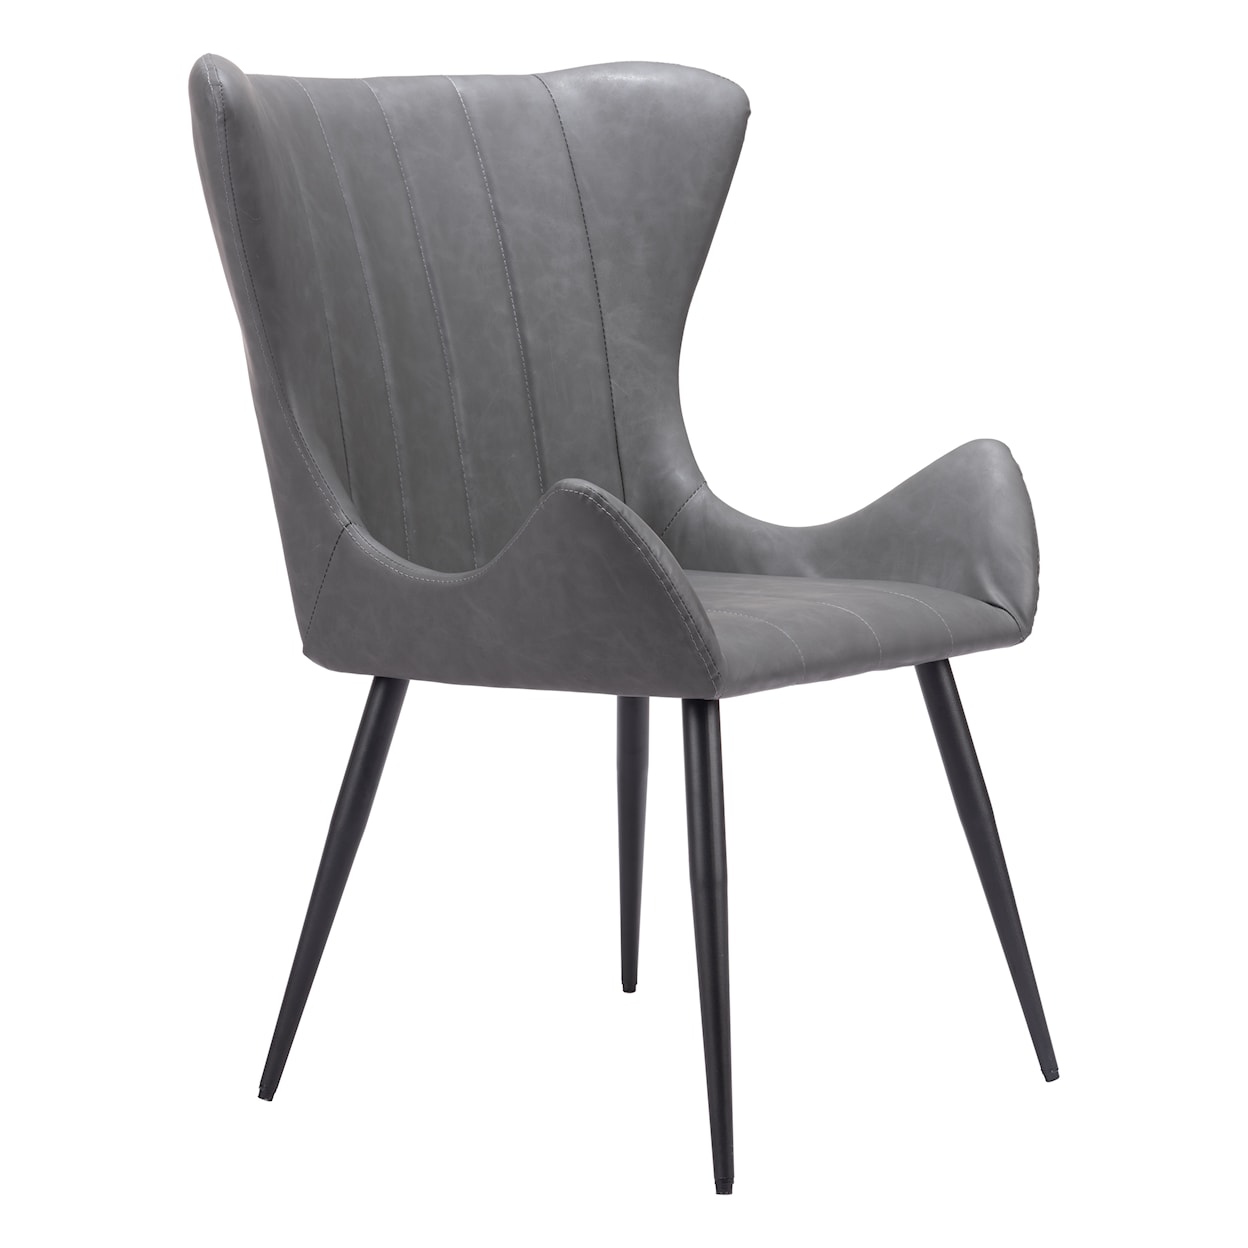 Zuo Alejandro Dining Chair